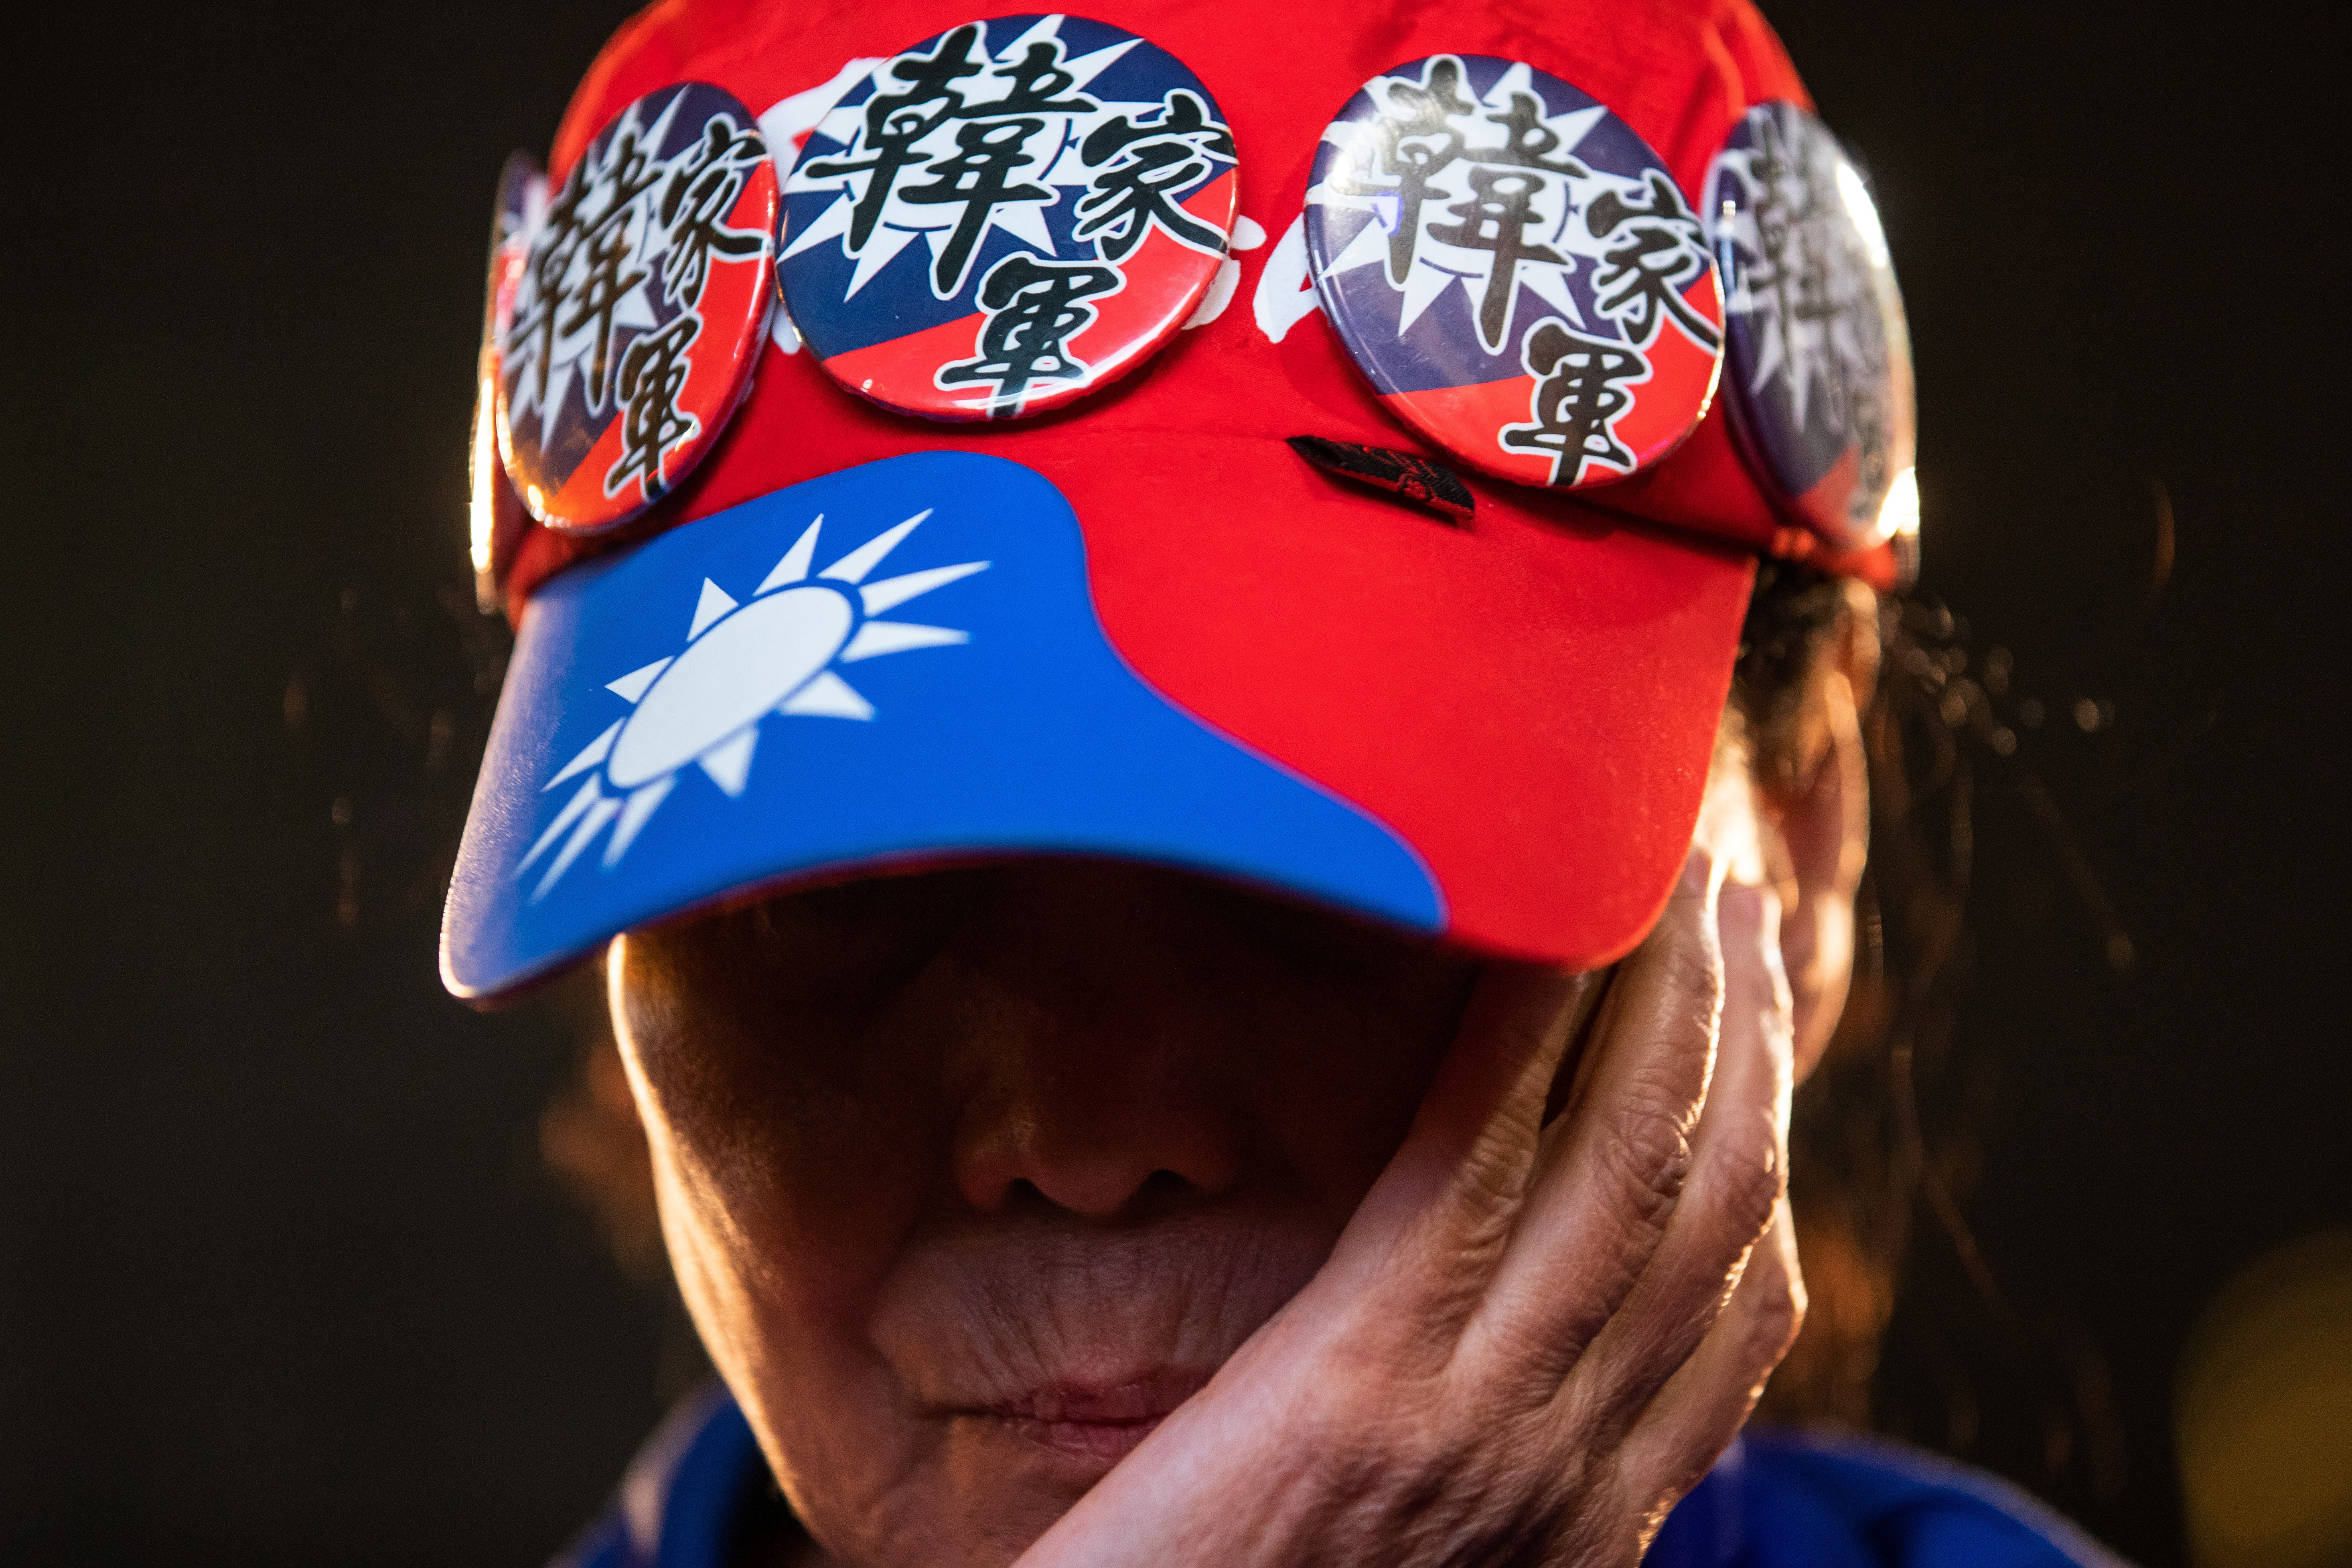 The KMT campaign was undermined by divisions within the party, observers say. Photo: Bloomberg